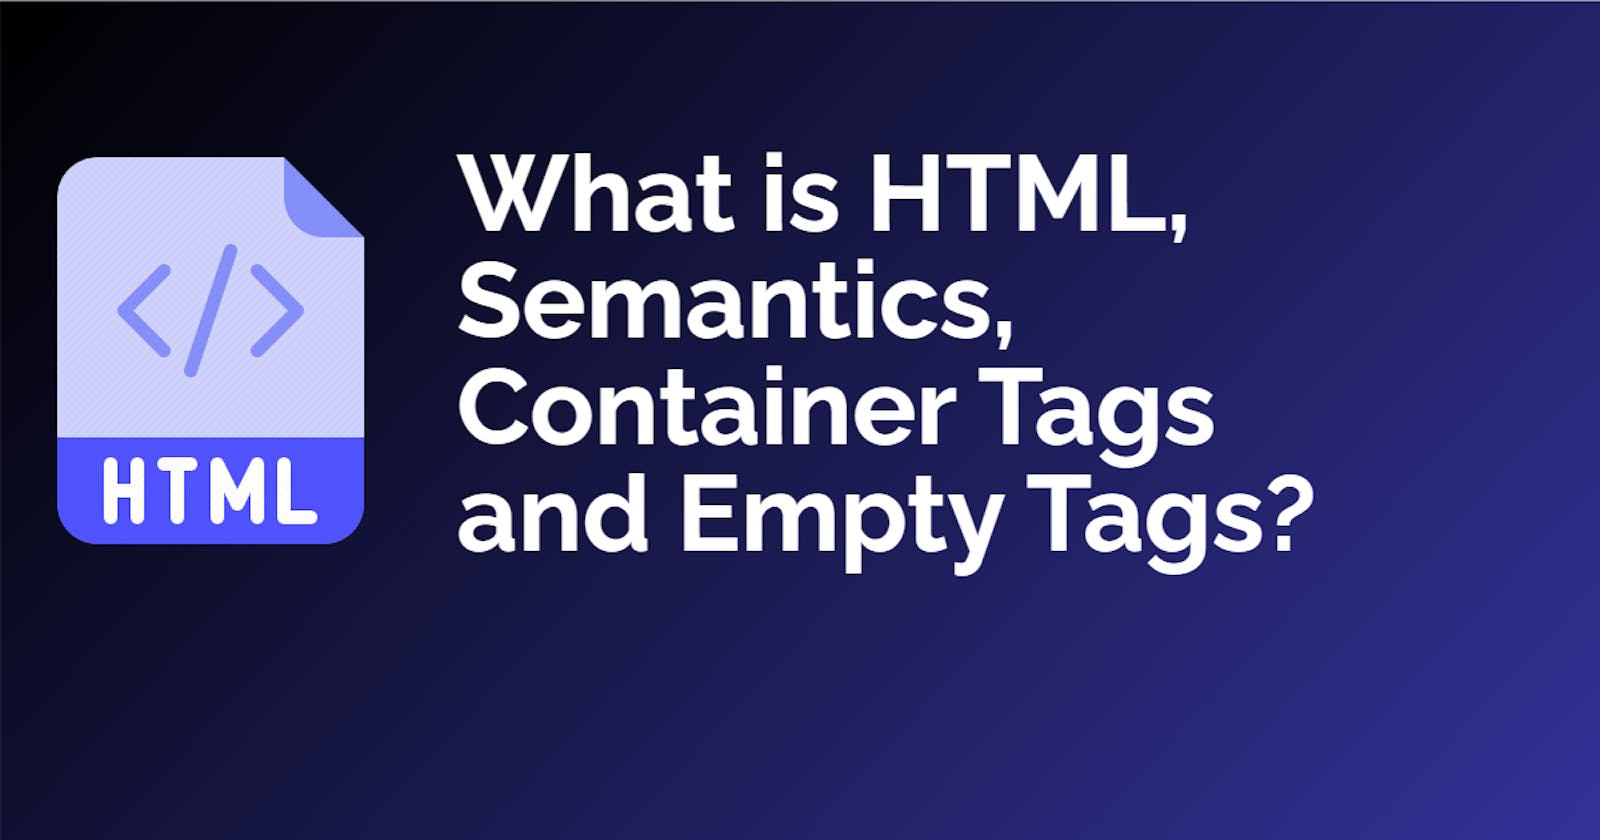 What is HTML, Semantics, Container Tags and Empty Tags?